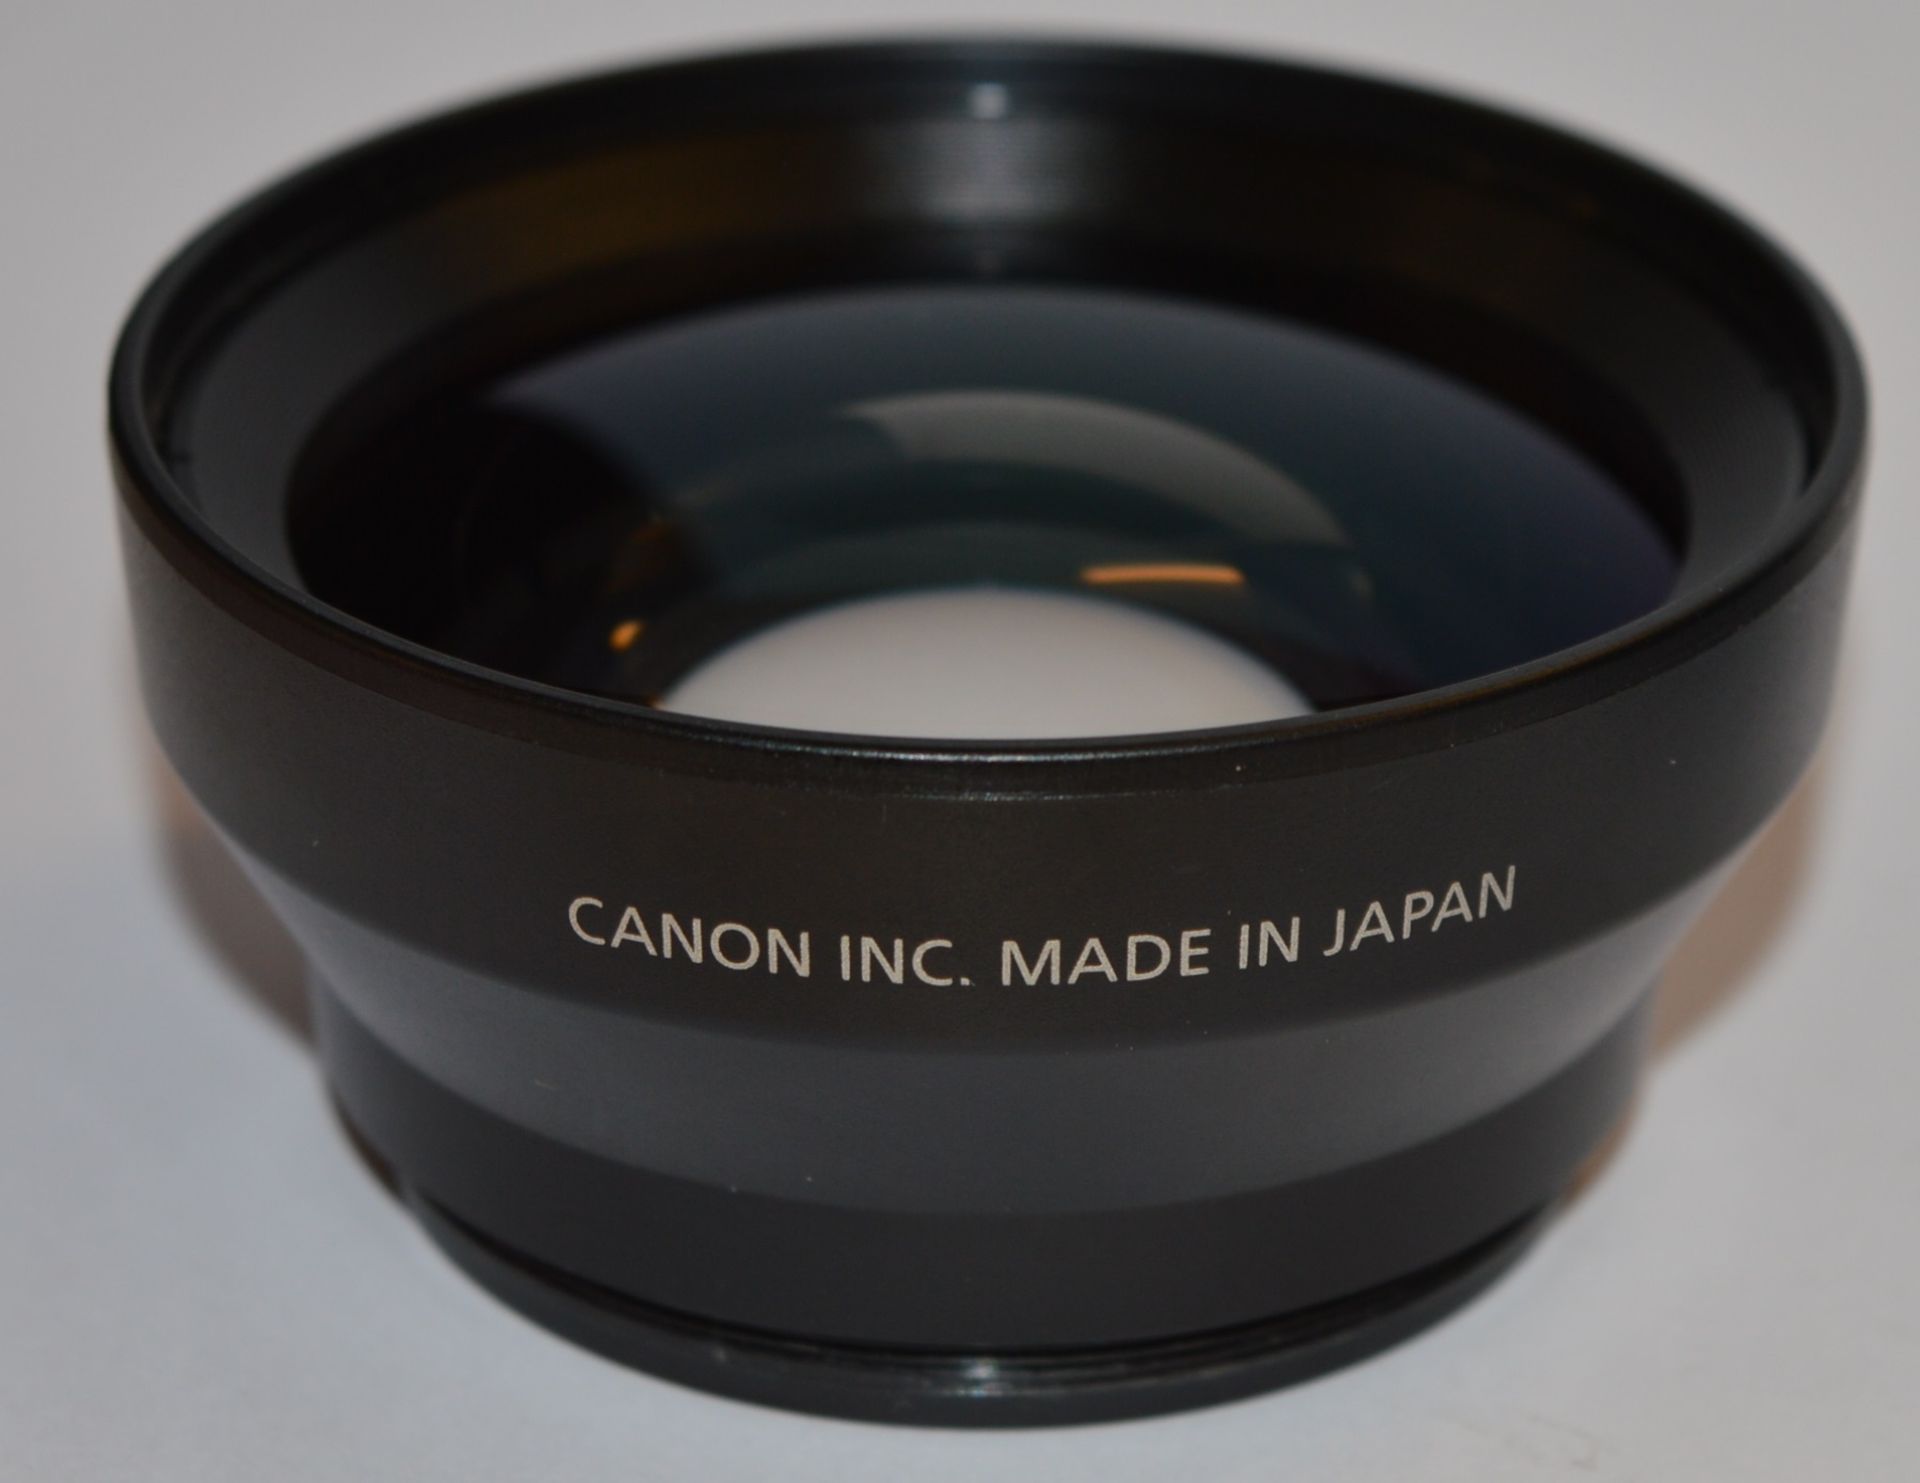 1 x Canon WC-DC58A 0.75x Wide Angle Converter Lens - CL011 - Ref JP137 - Very Good Condition - - Image 4 of 6